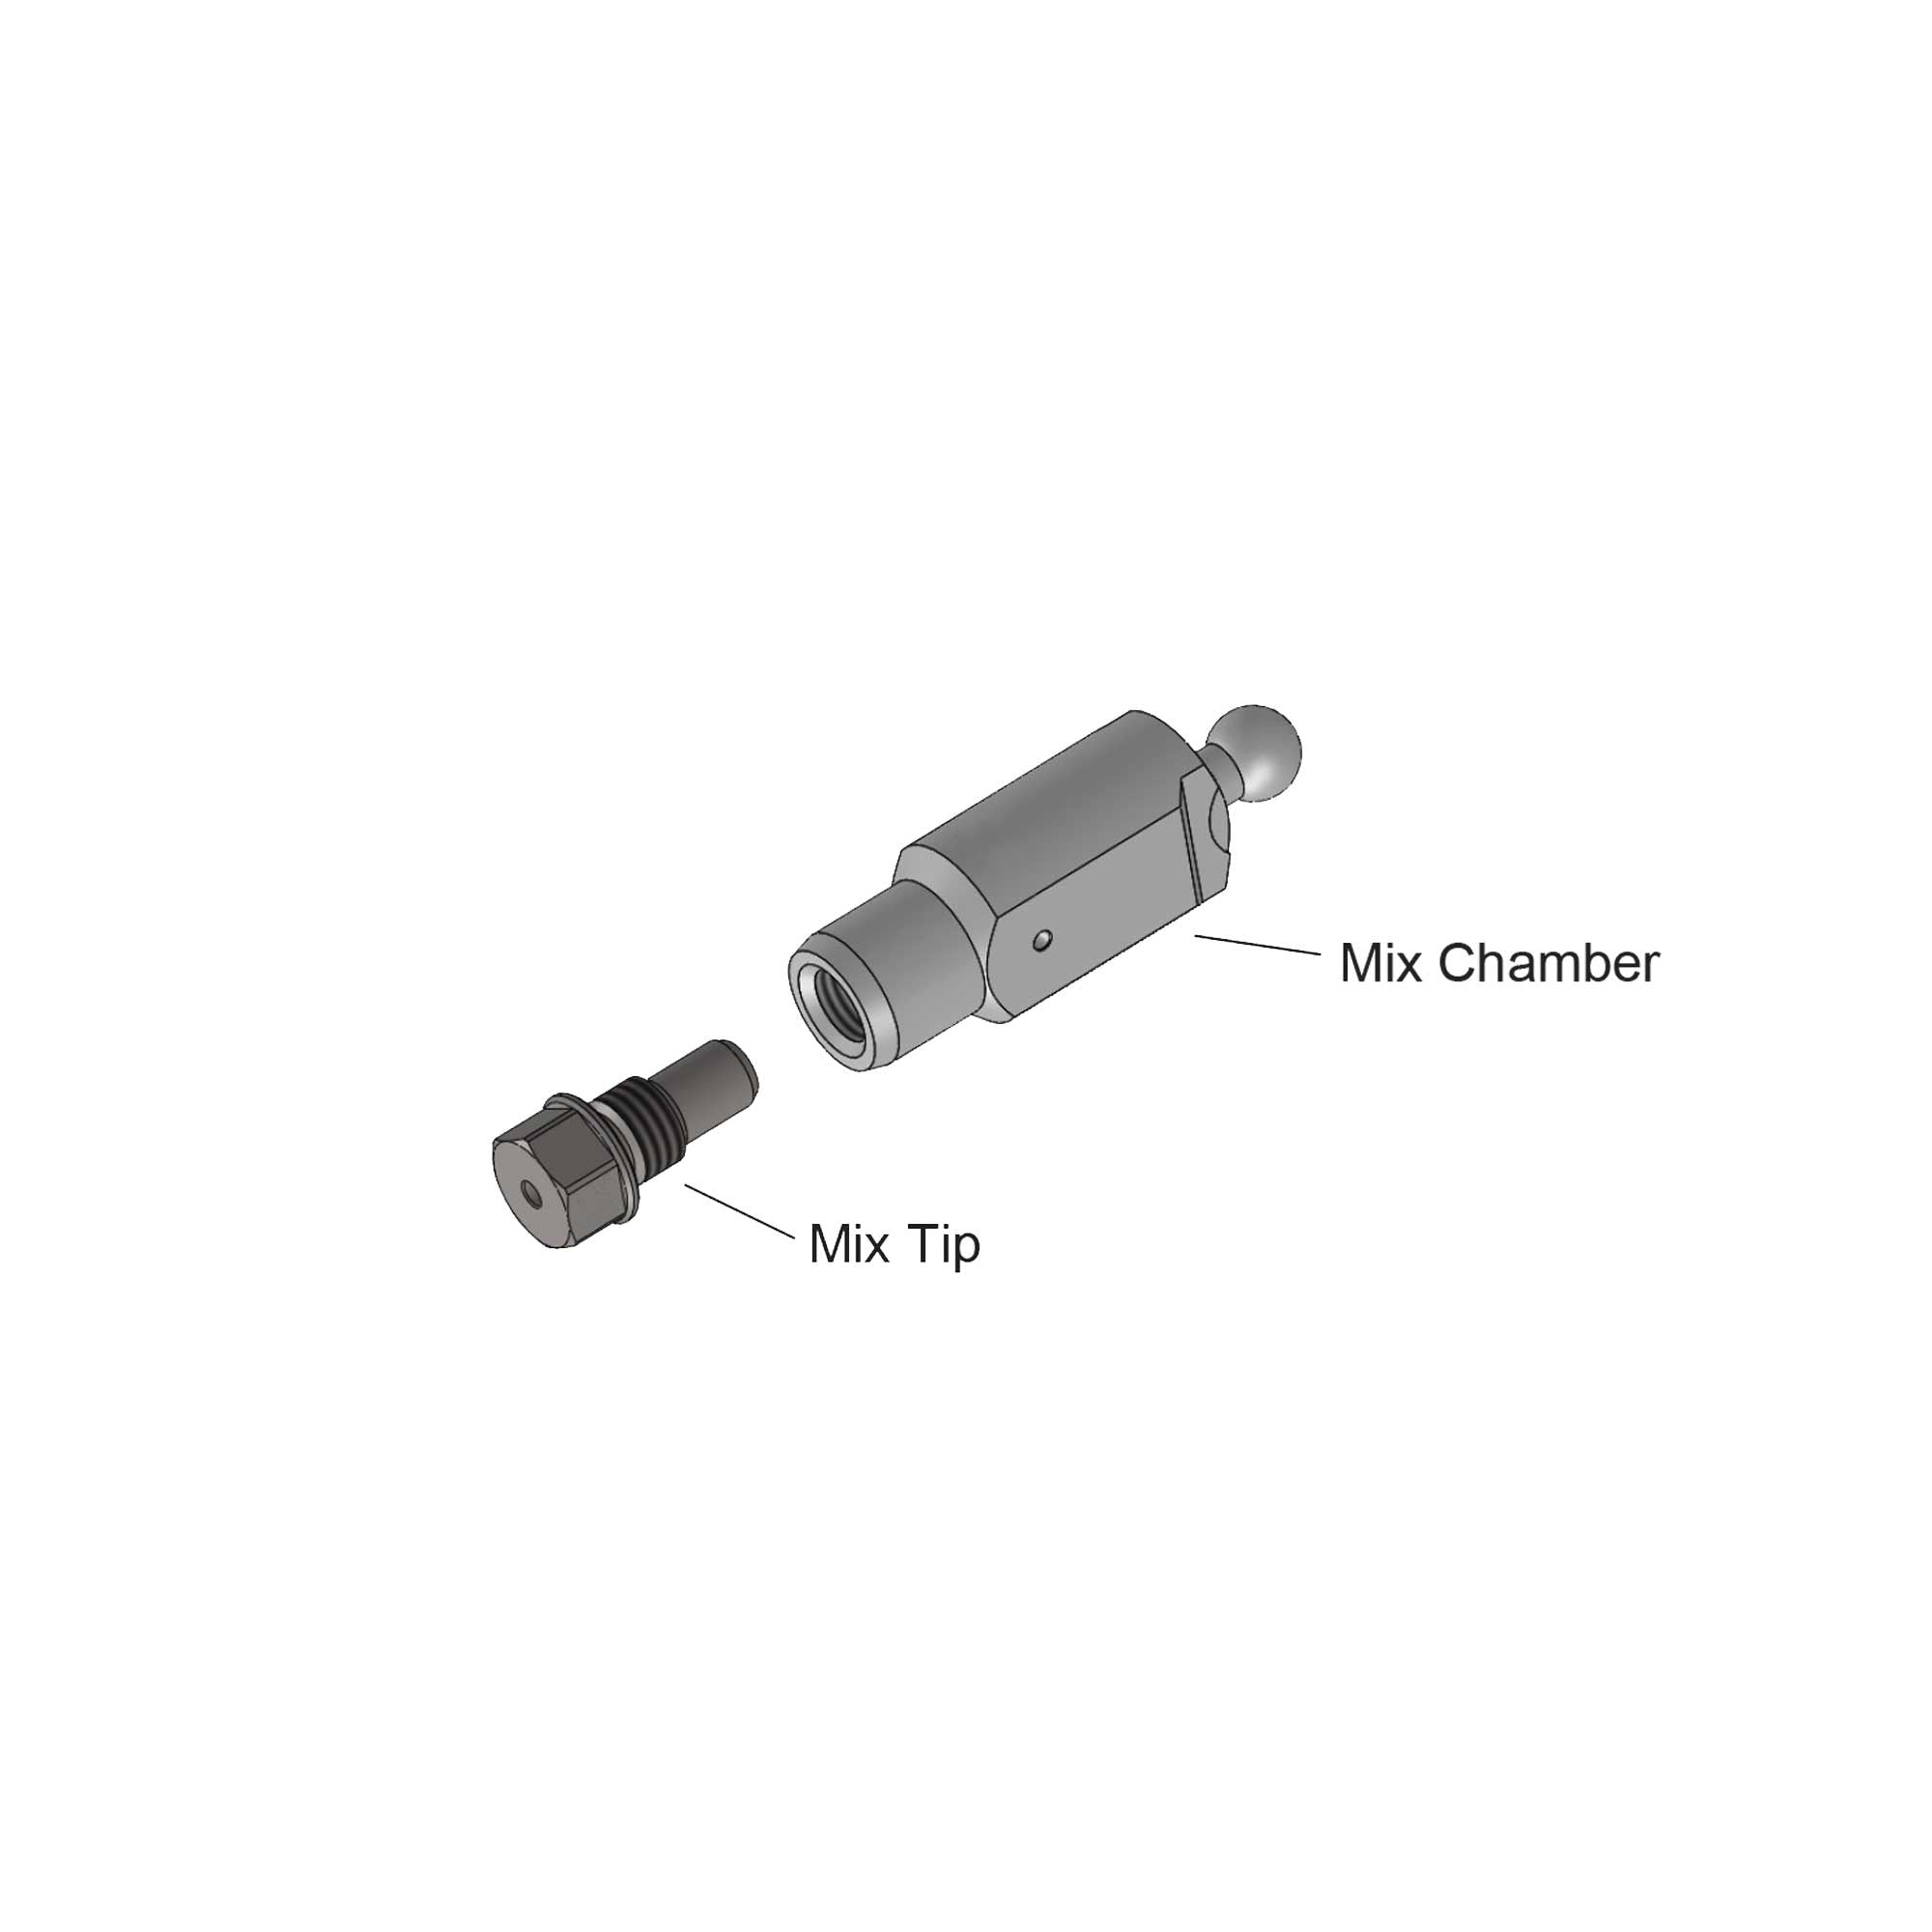 336443 - Mix Chamber D 15 and Tip Kit - PURspray